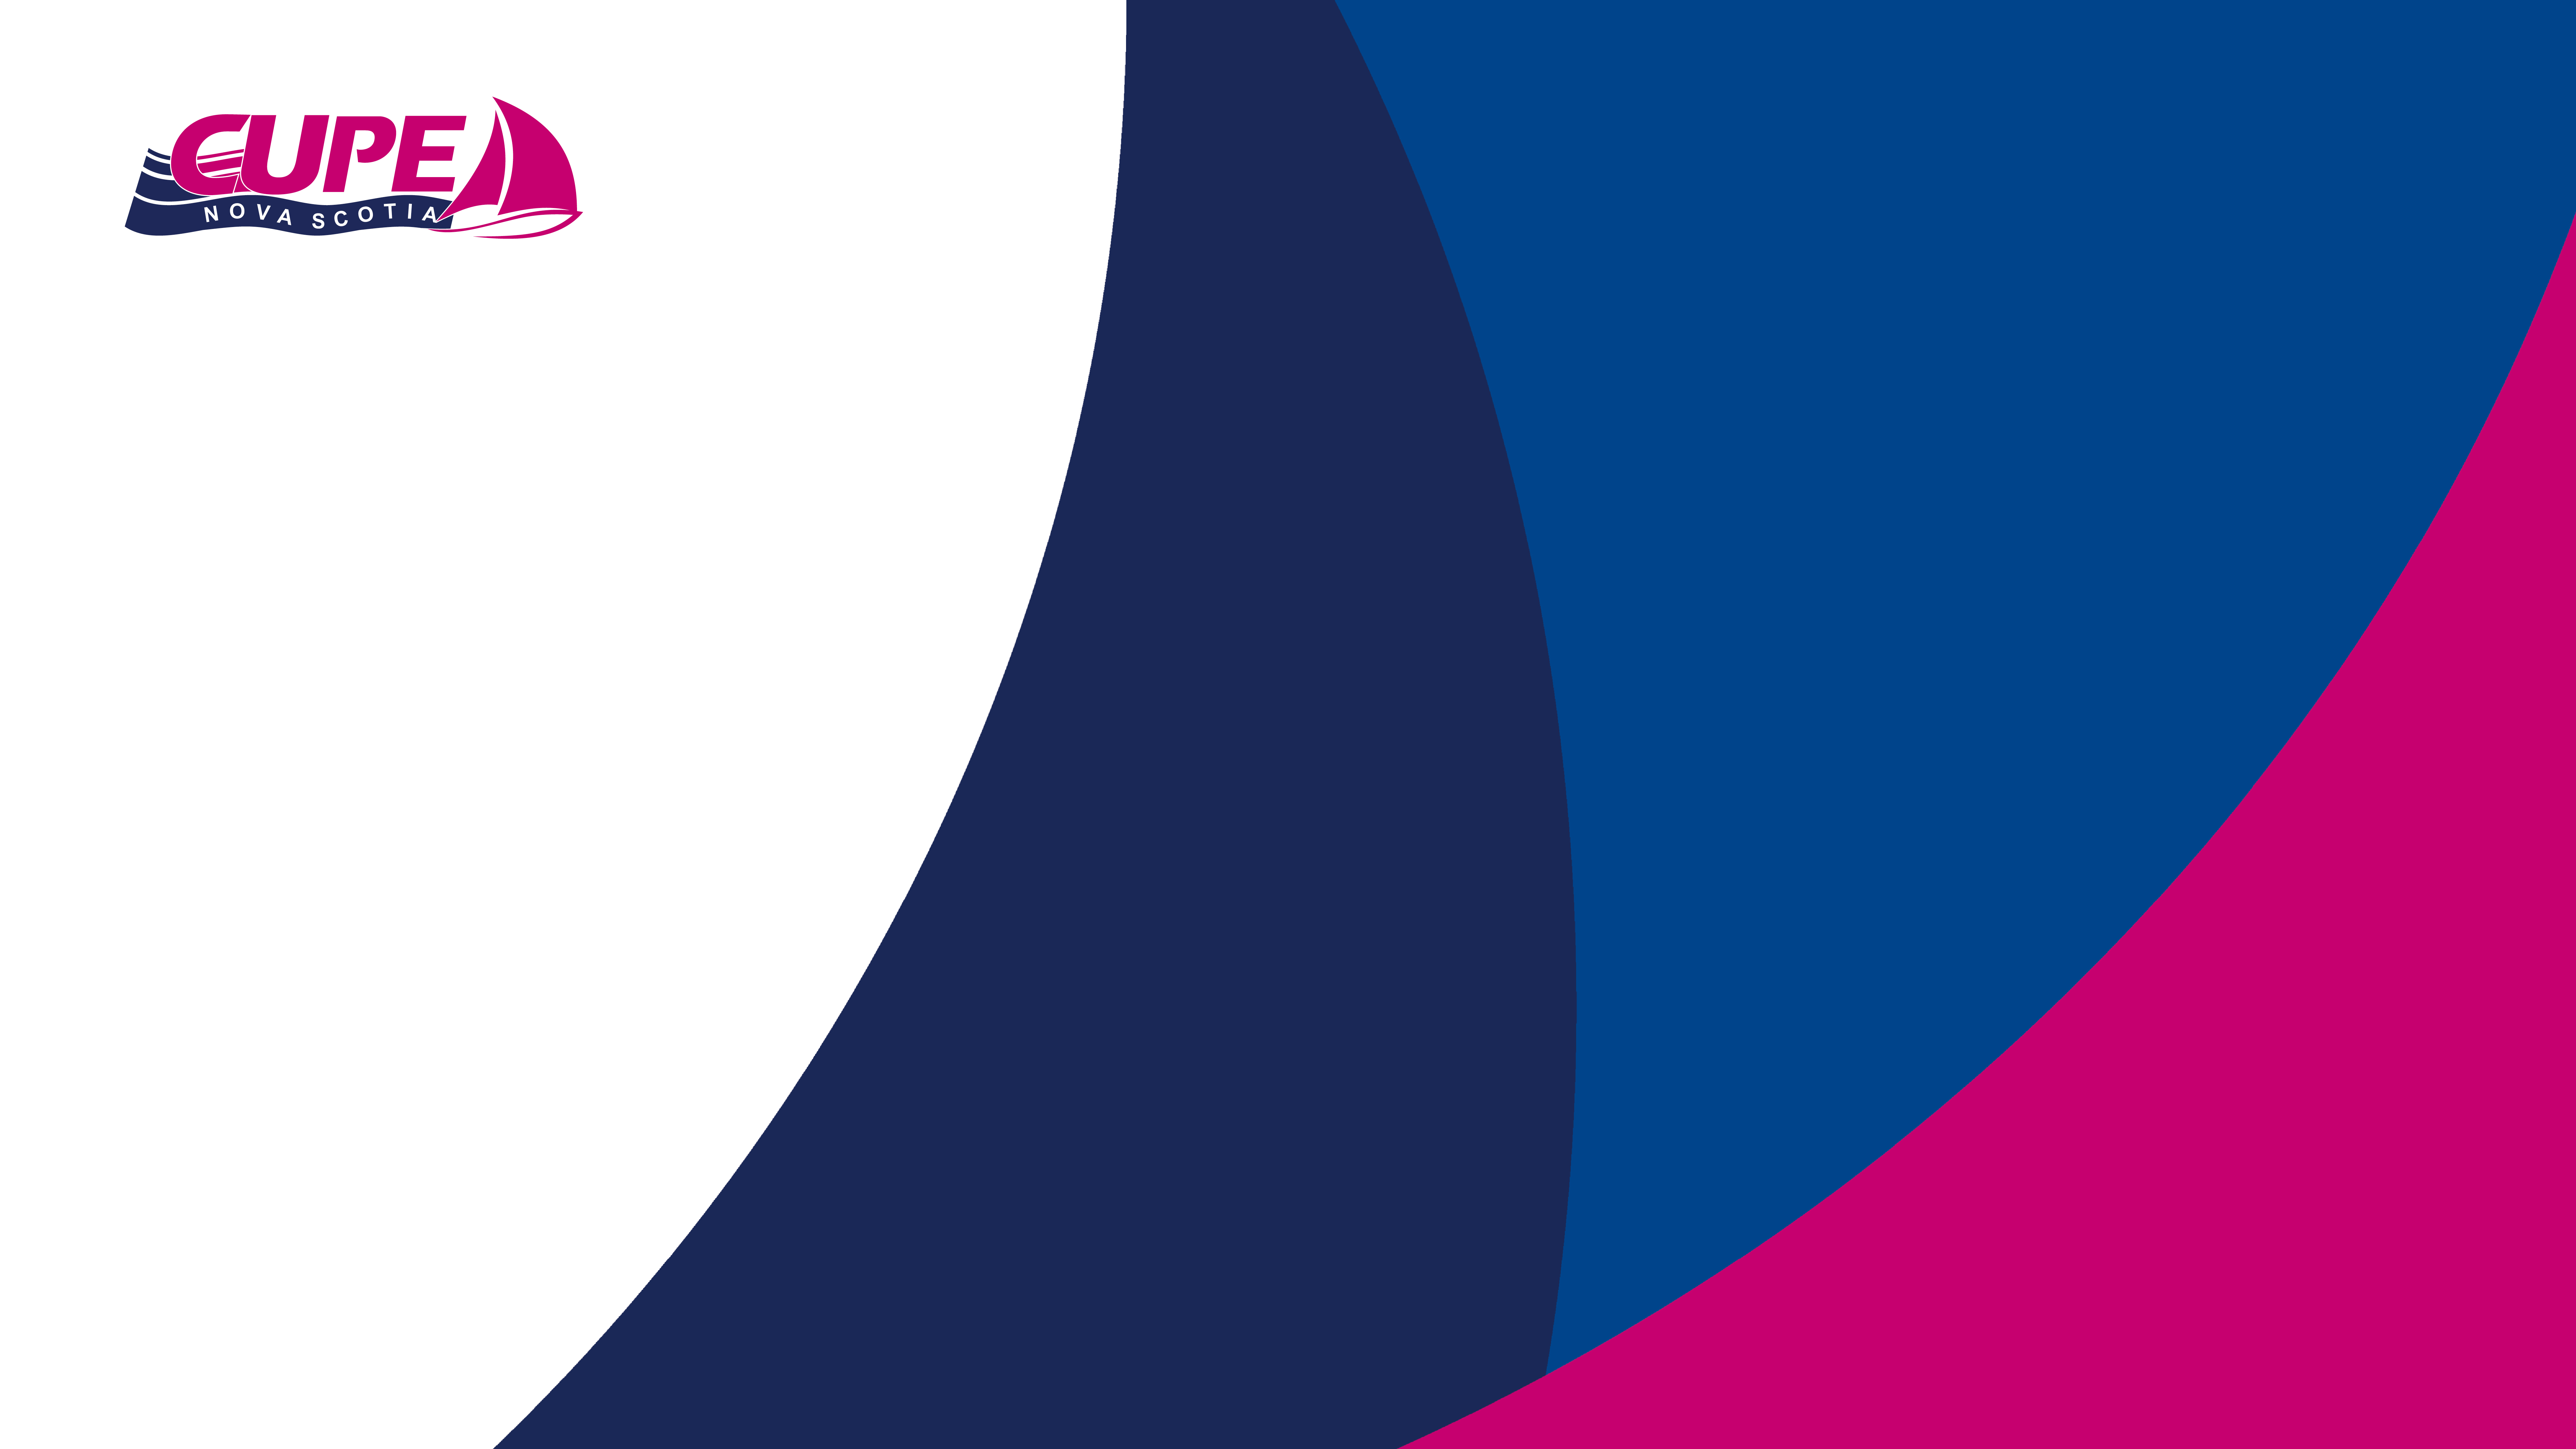 Background image for virtual meetings. CUPE NS logo with three colours: pink, blue and white